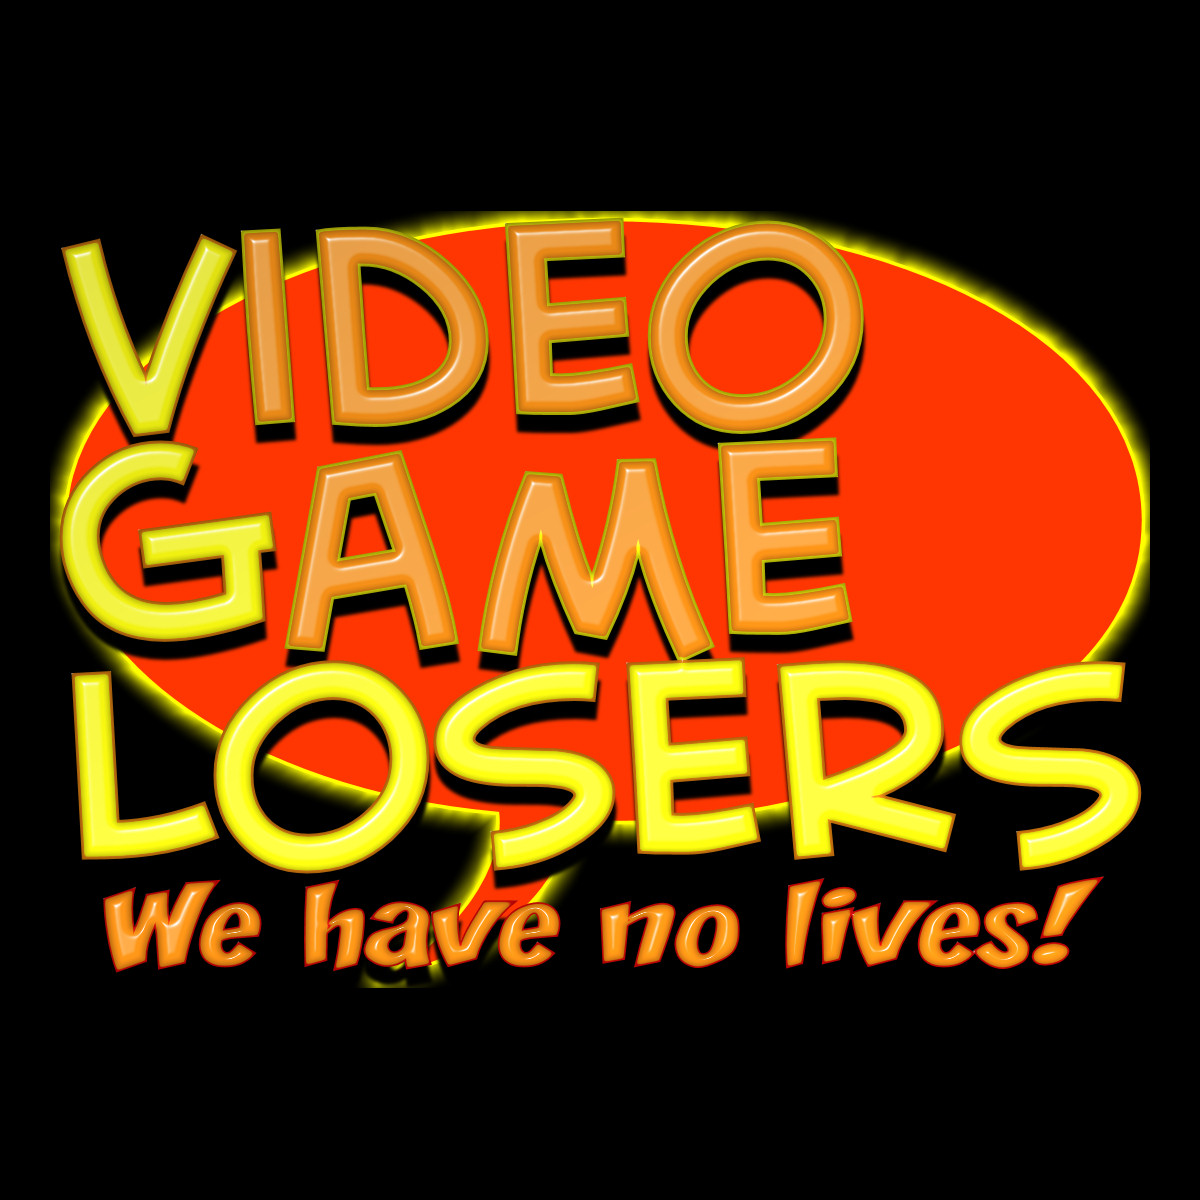 Video Game Losers #25: SNES vs NES which do you prefer?